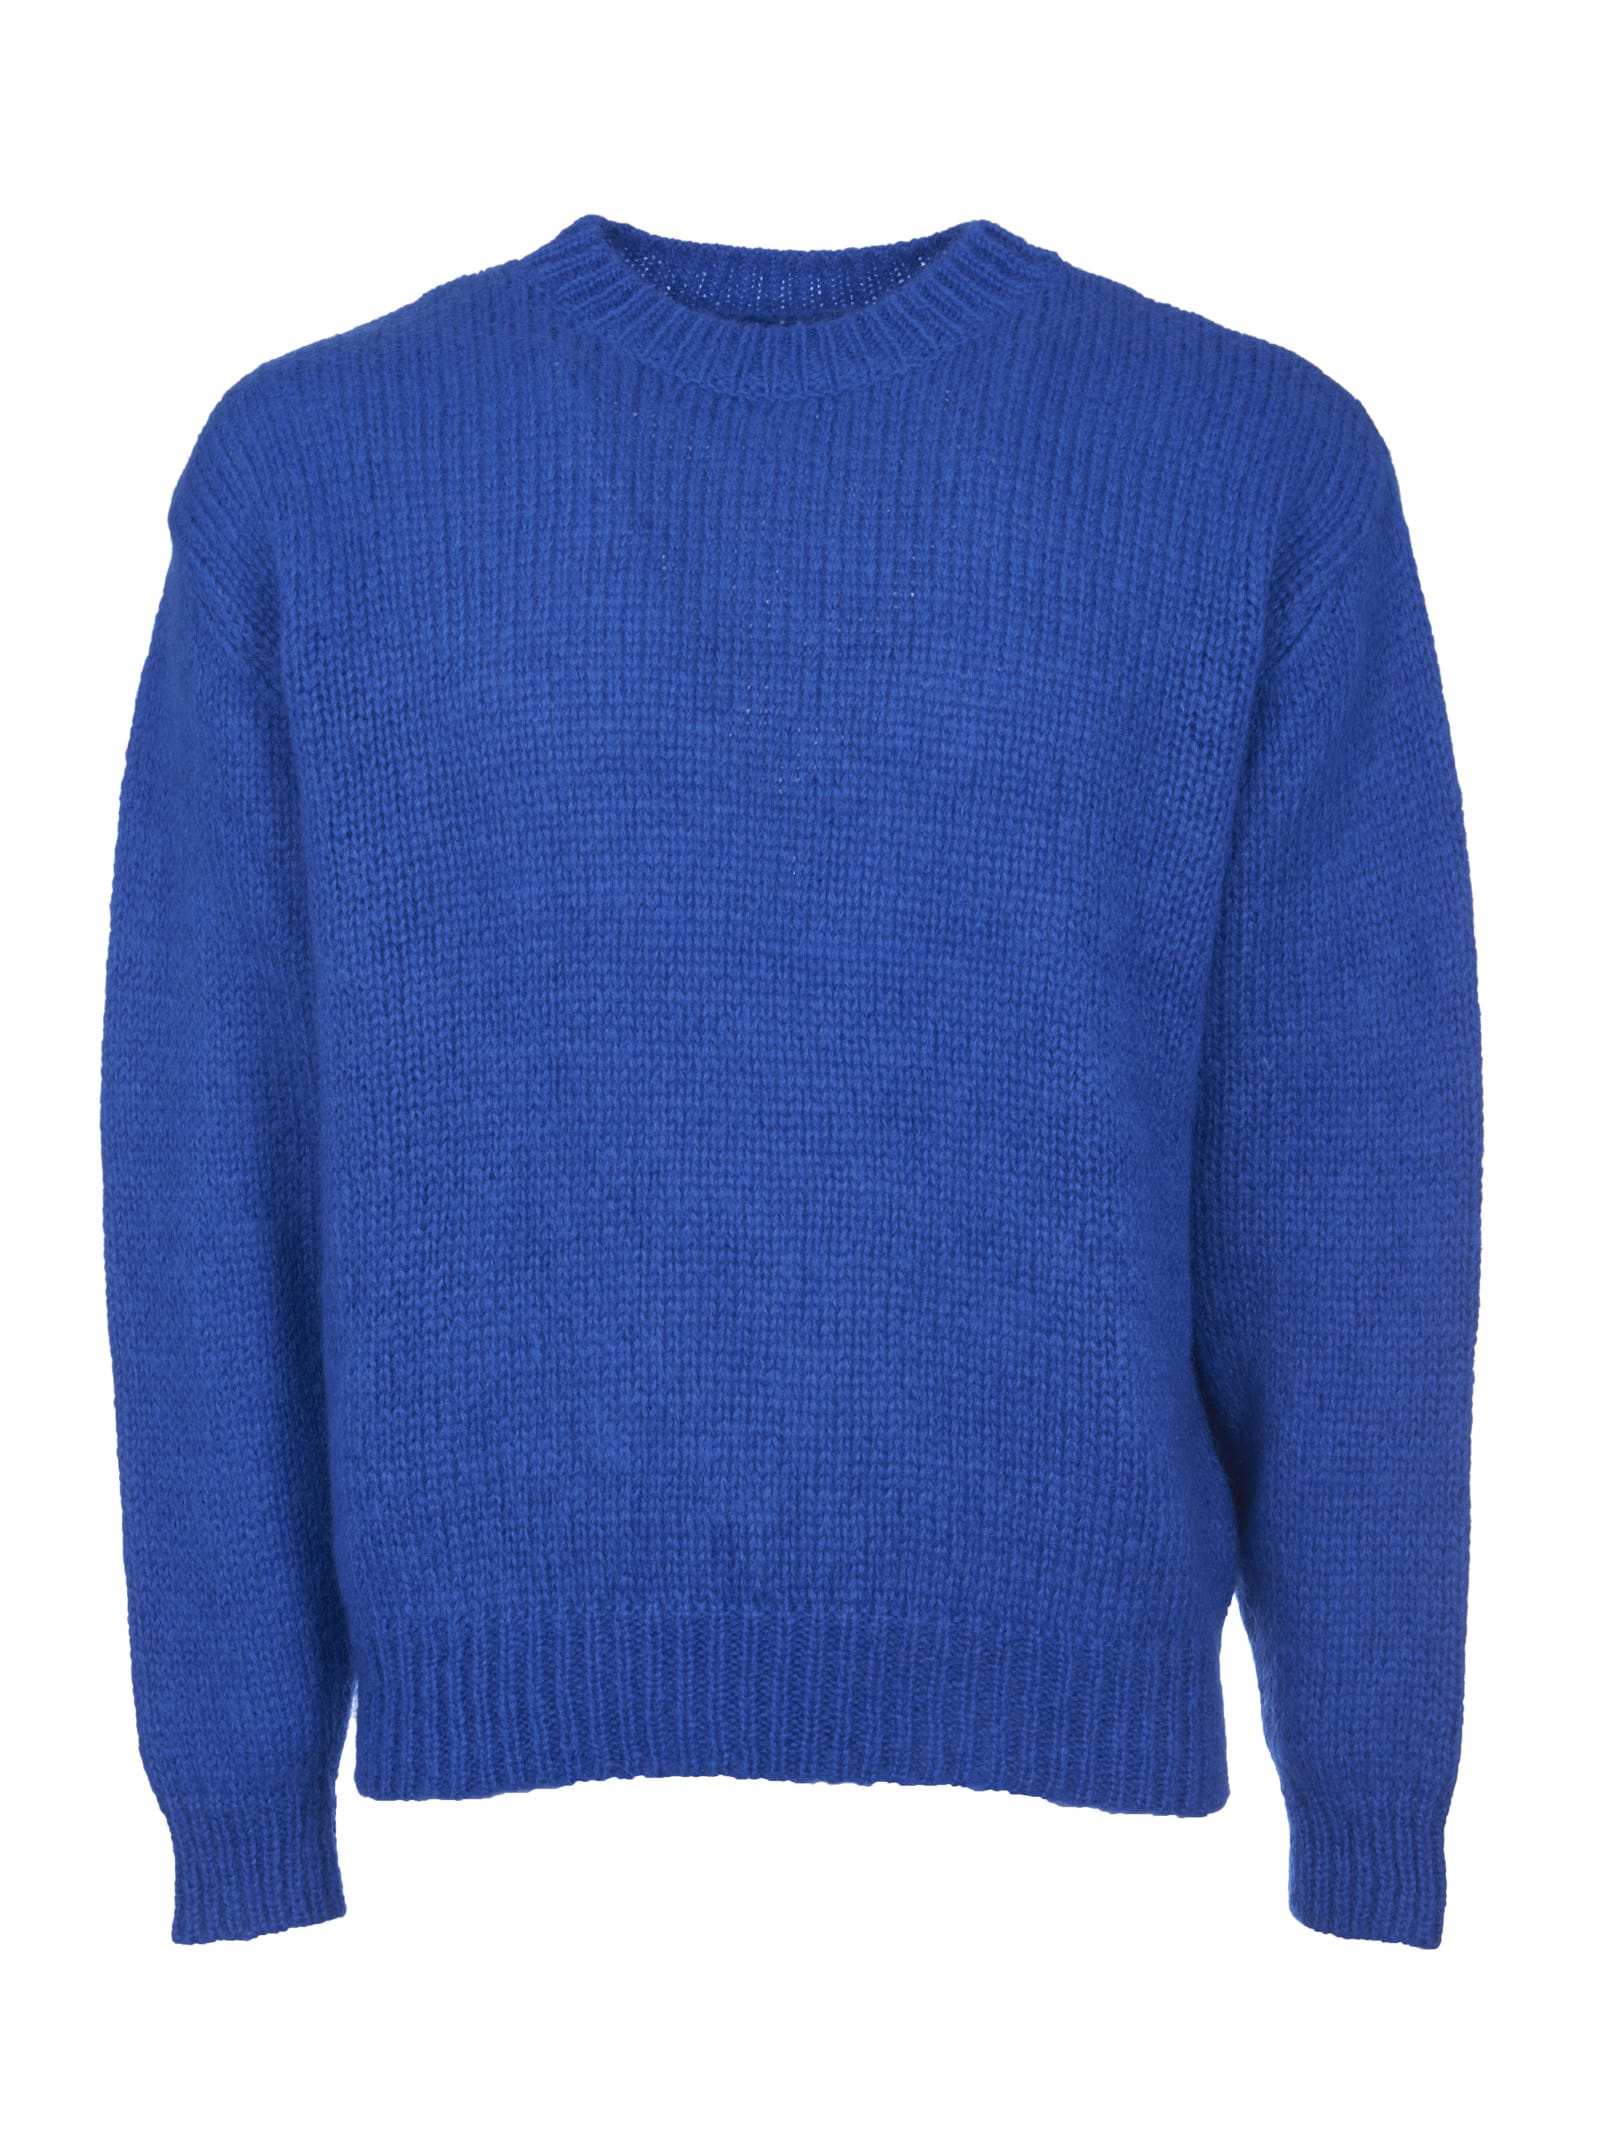 REPRESENT Plain Woven Ribbed Sweater